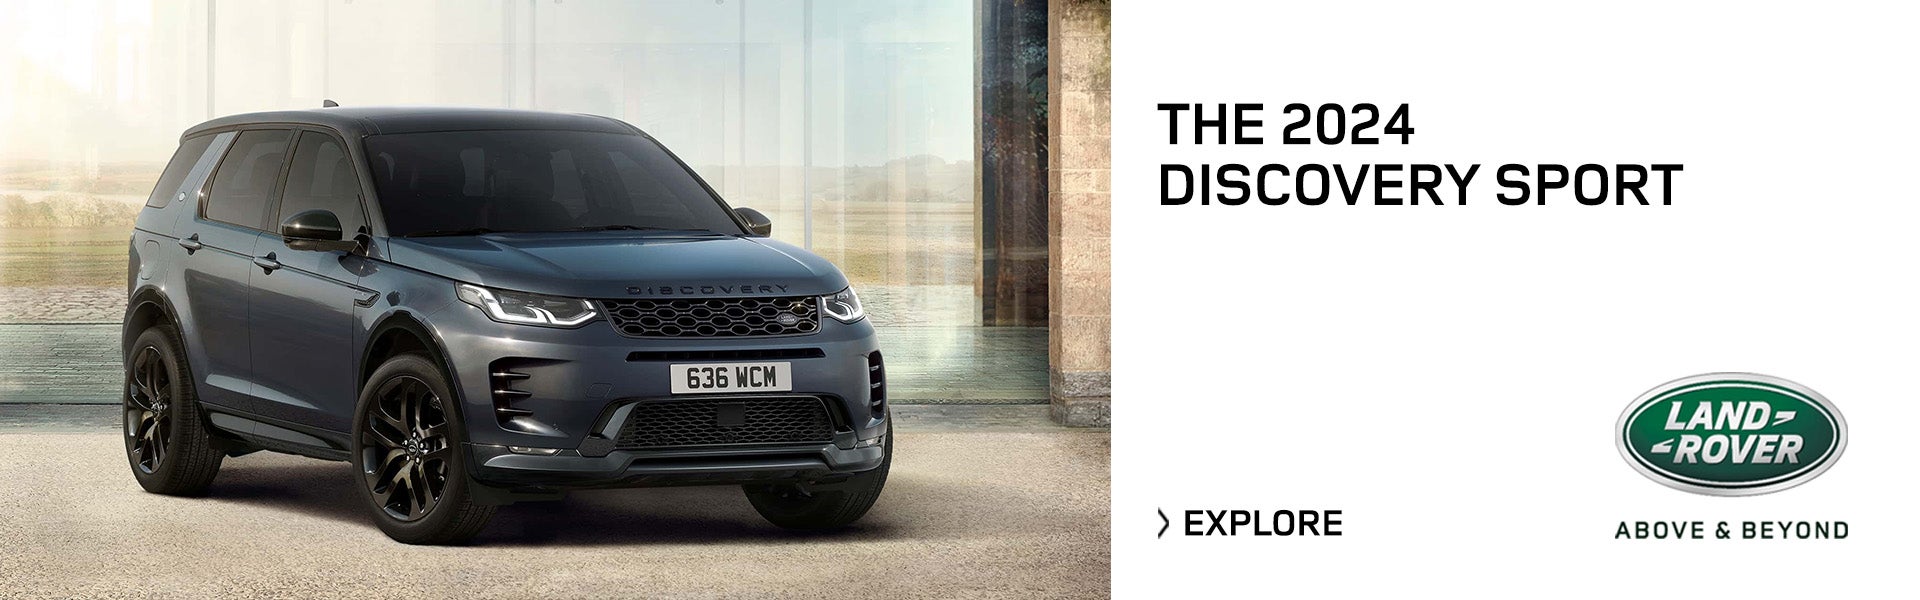 2024 Discovery Sport